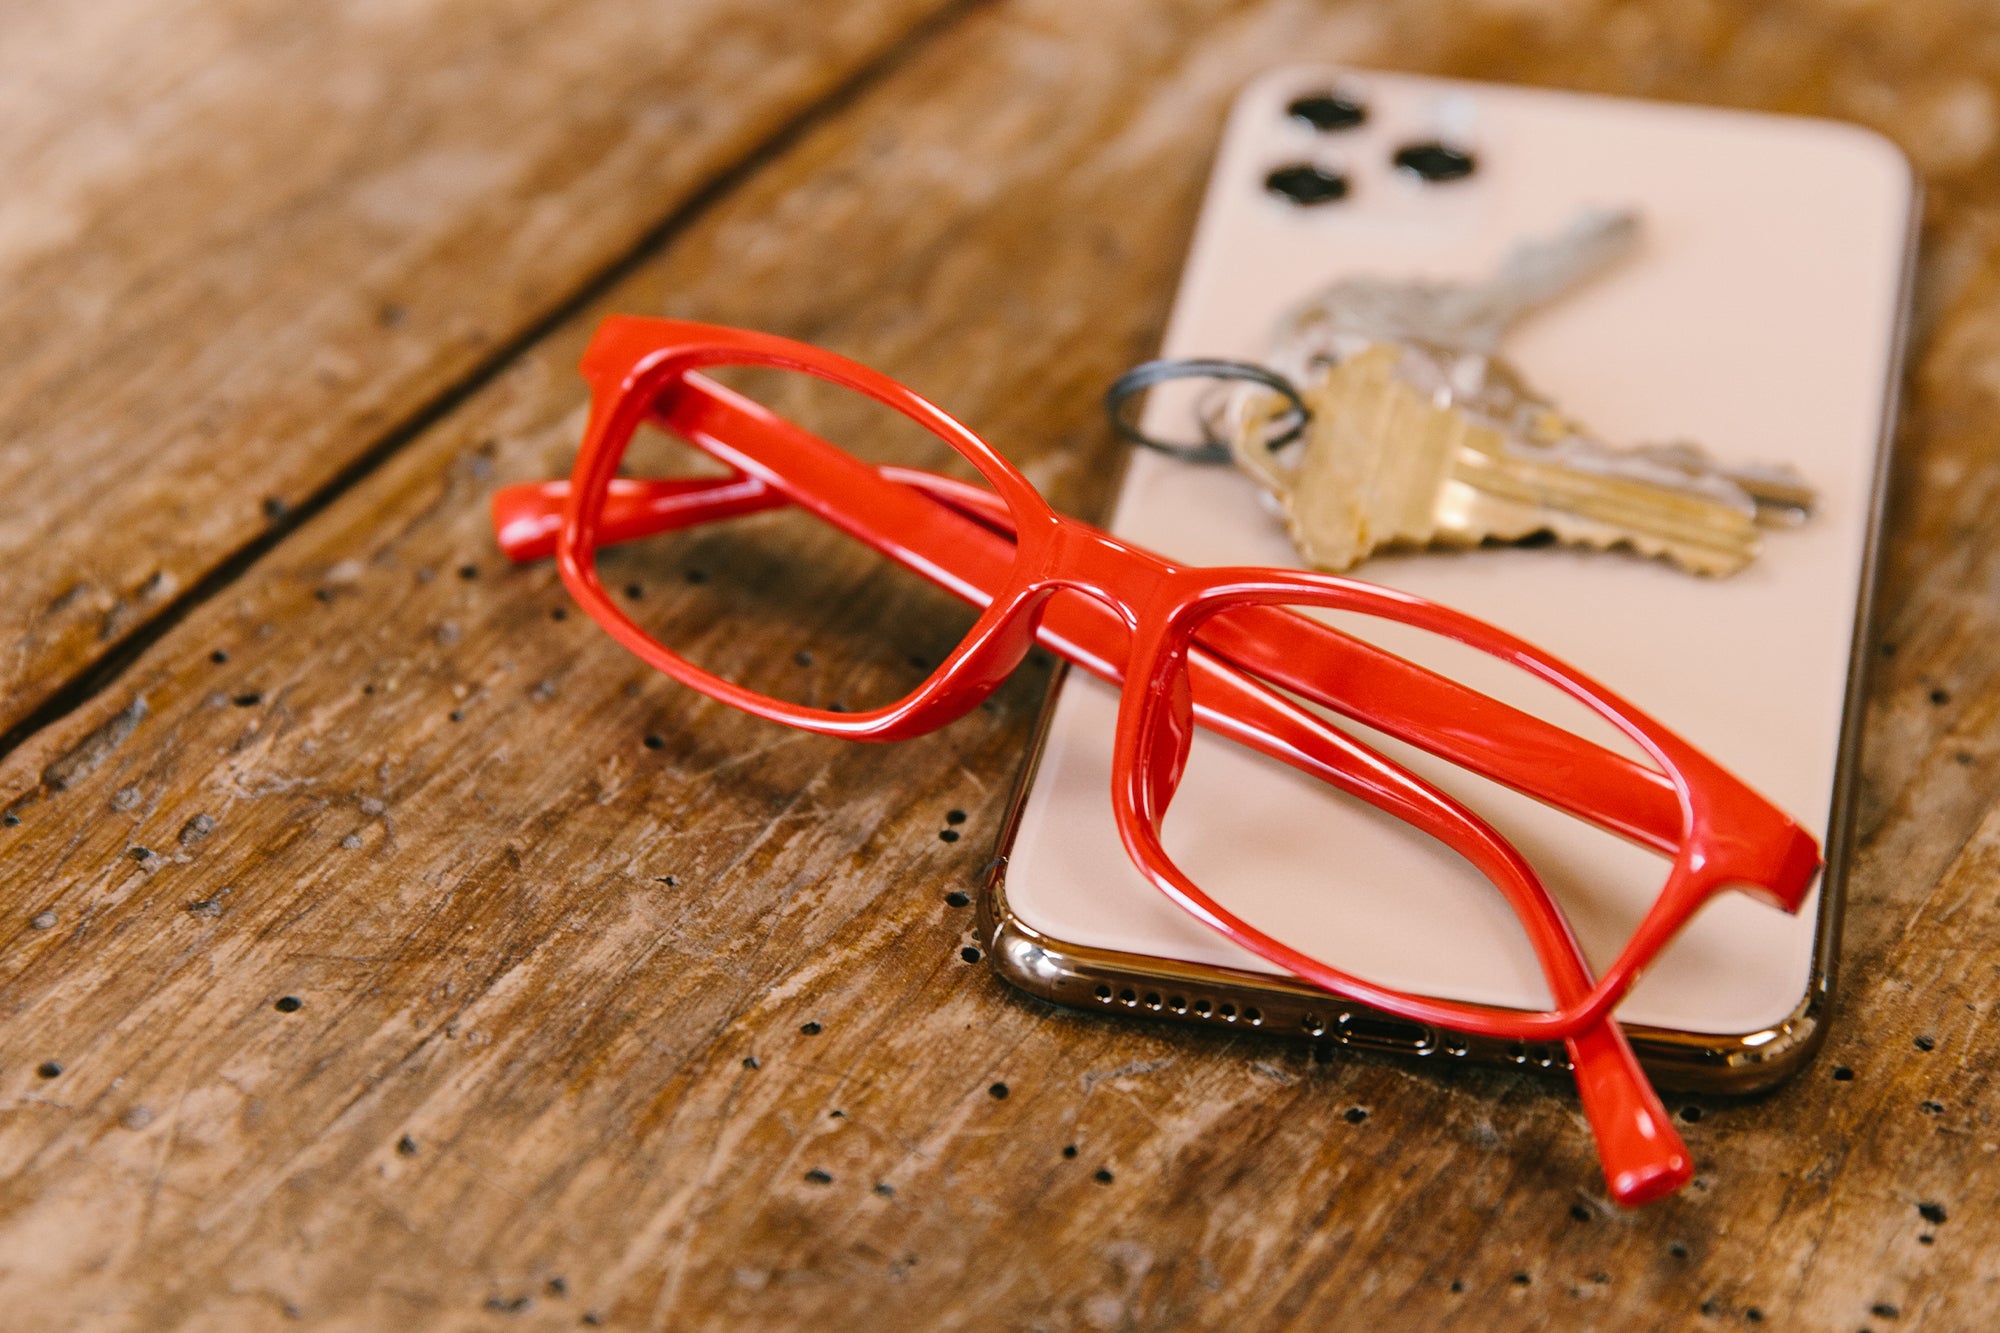 Peepers red reading glasses sitting on a phone and keys